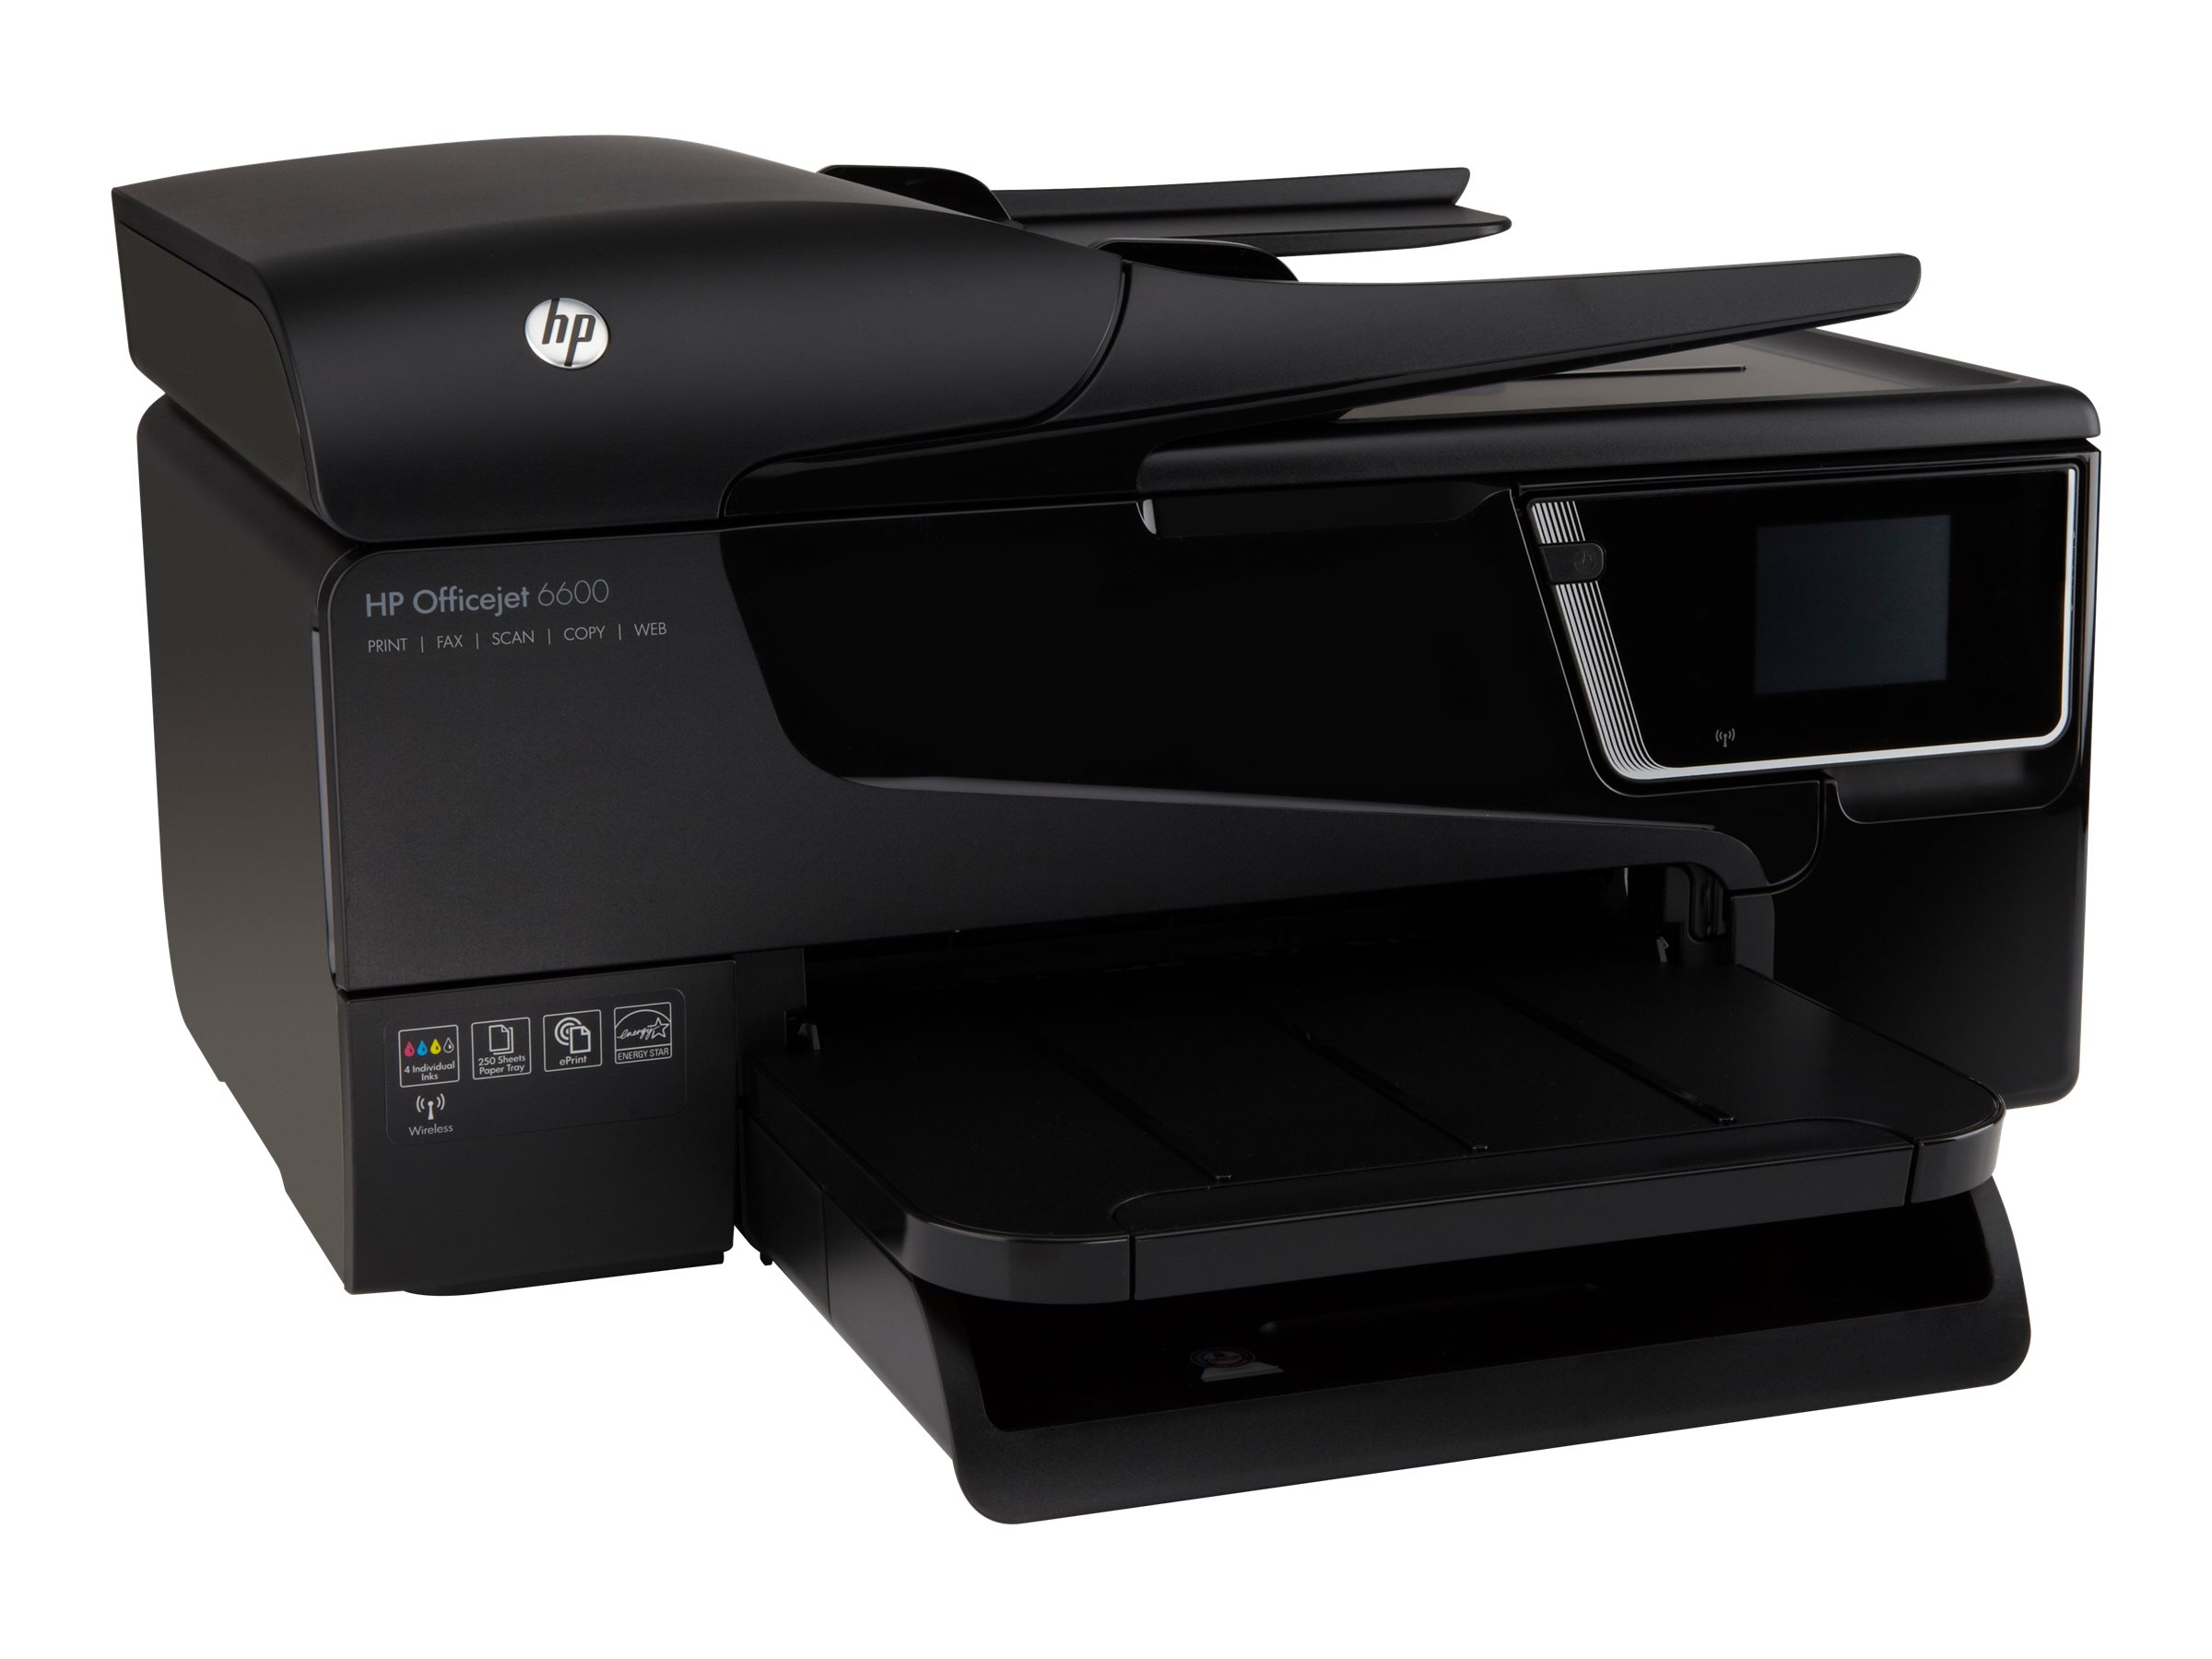 HP Officejet 6600 e-All-in-One H711a - Multifunction printer - color - ink-jet - Legal (8.5 in x 14 in)/A4 (8.25 in x 11.7 in) (original) - Legal (media) - up to 32 ppm (copying) - up to 14 ppm (printing) - 250 sheets - 33.6 Kbps - USB 2.0, Wi-Fi(n) - image 5 of 8